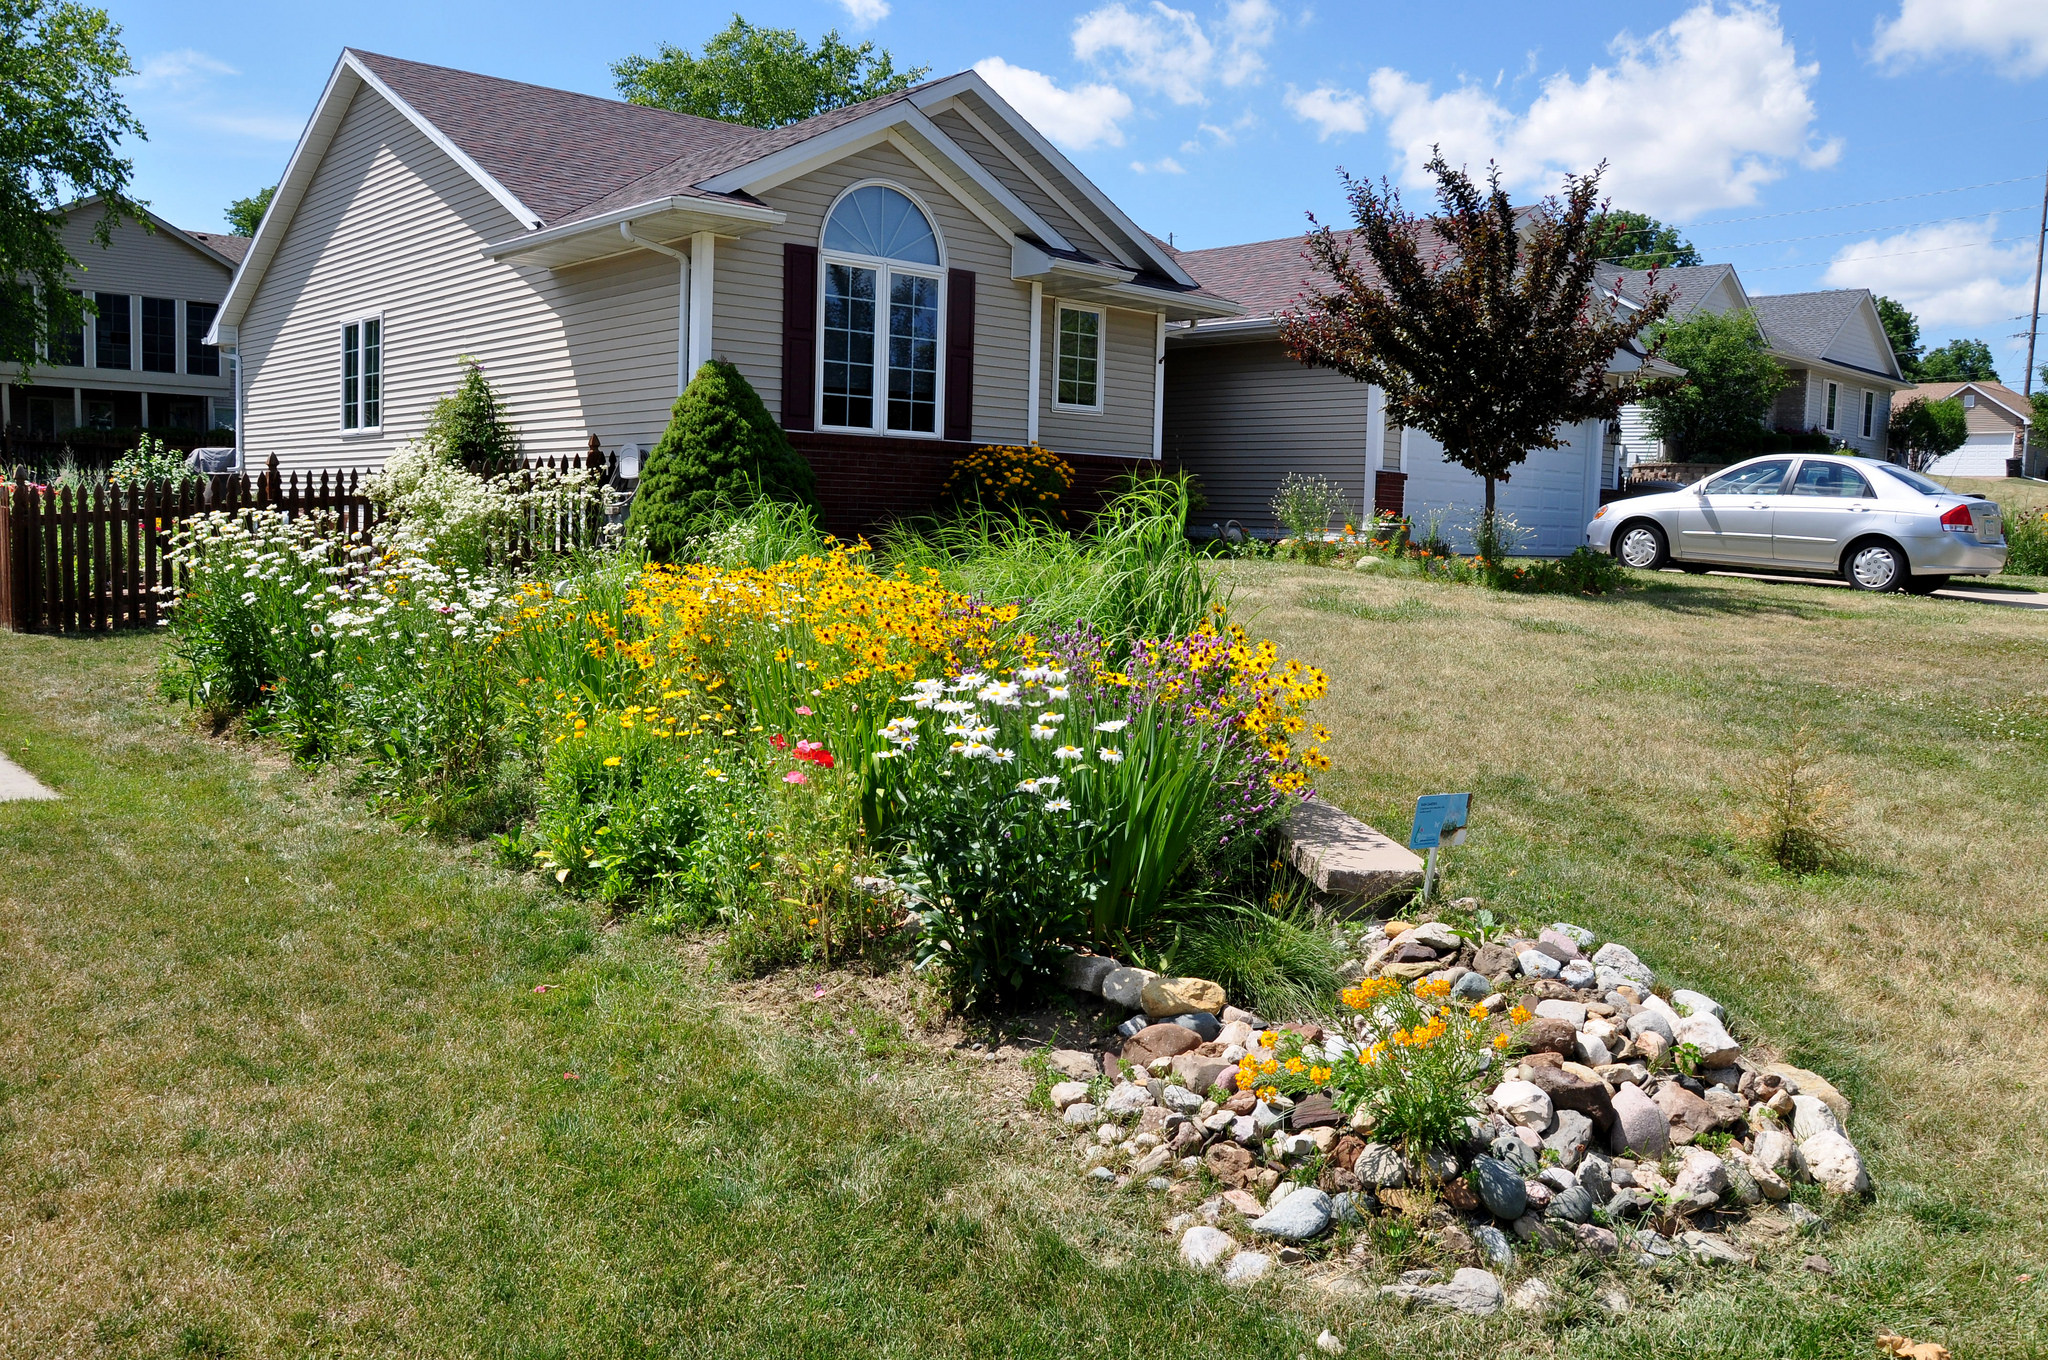 Rain gardens are one way Iowans help soak up and filter rain water - all while beautifying their lawns | Iowa DNR